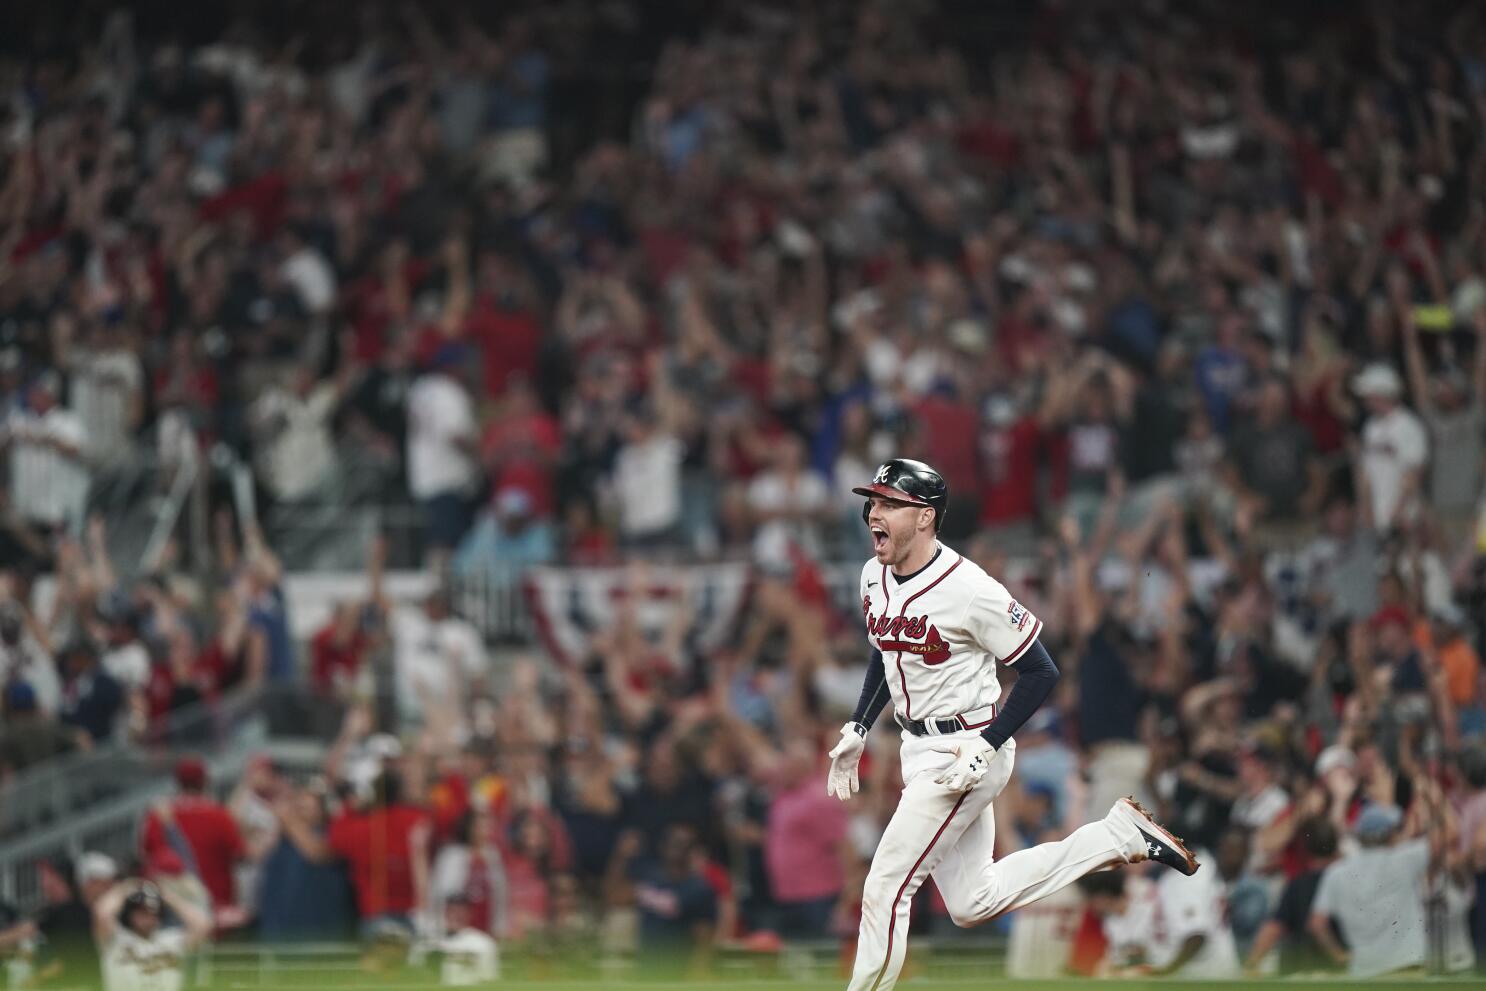 Freeman's HR lifts Braves to 4-3 win over Brewers in 10th